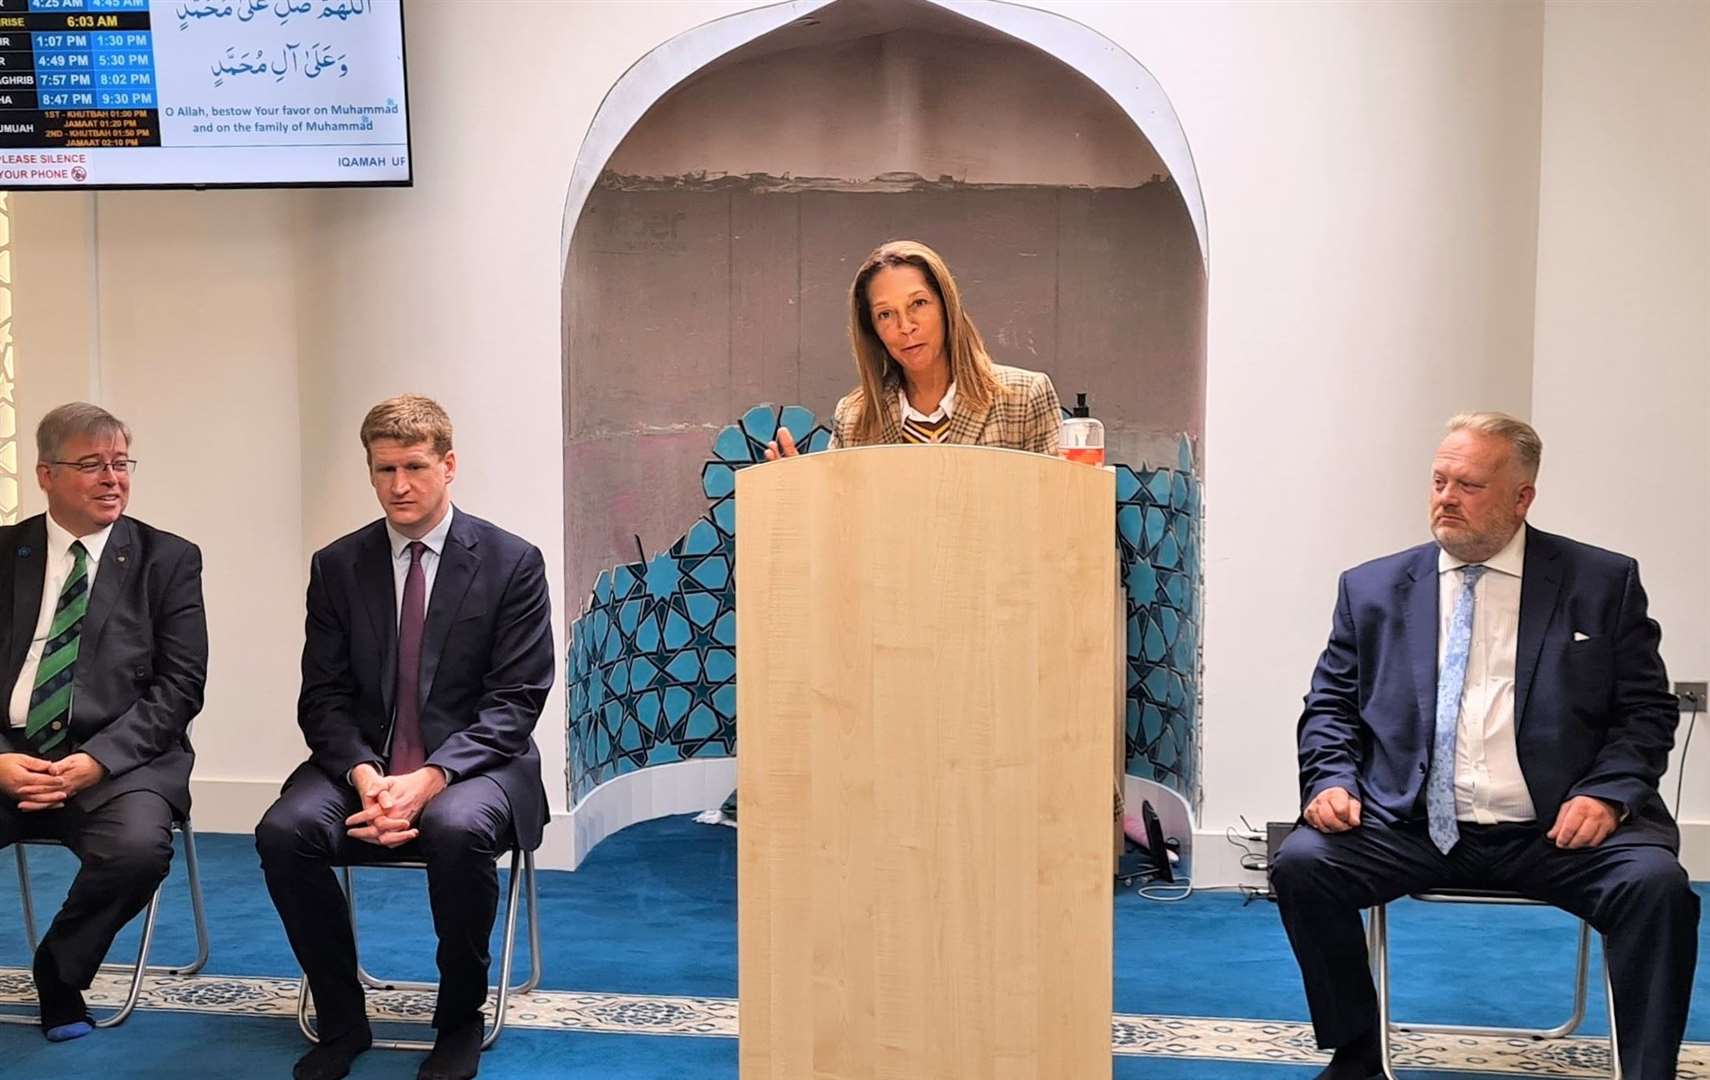 MP Helen Grant at the opening of the new mosque, with Cllr Martin Cox, PCC Matthew Scott and MBC Leader Cllr David Burton Picture: Helen Grant MP